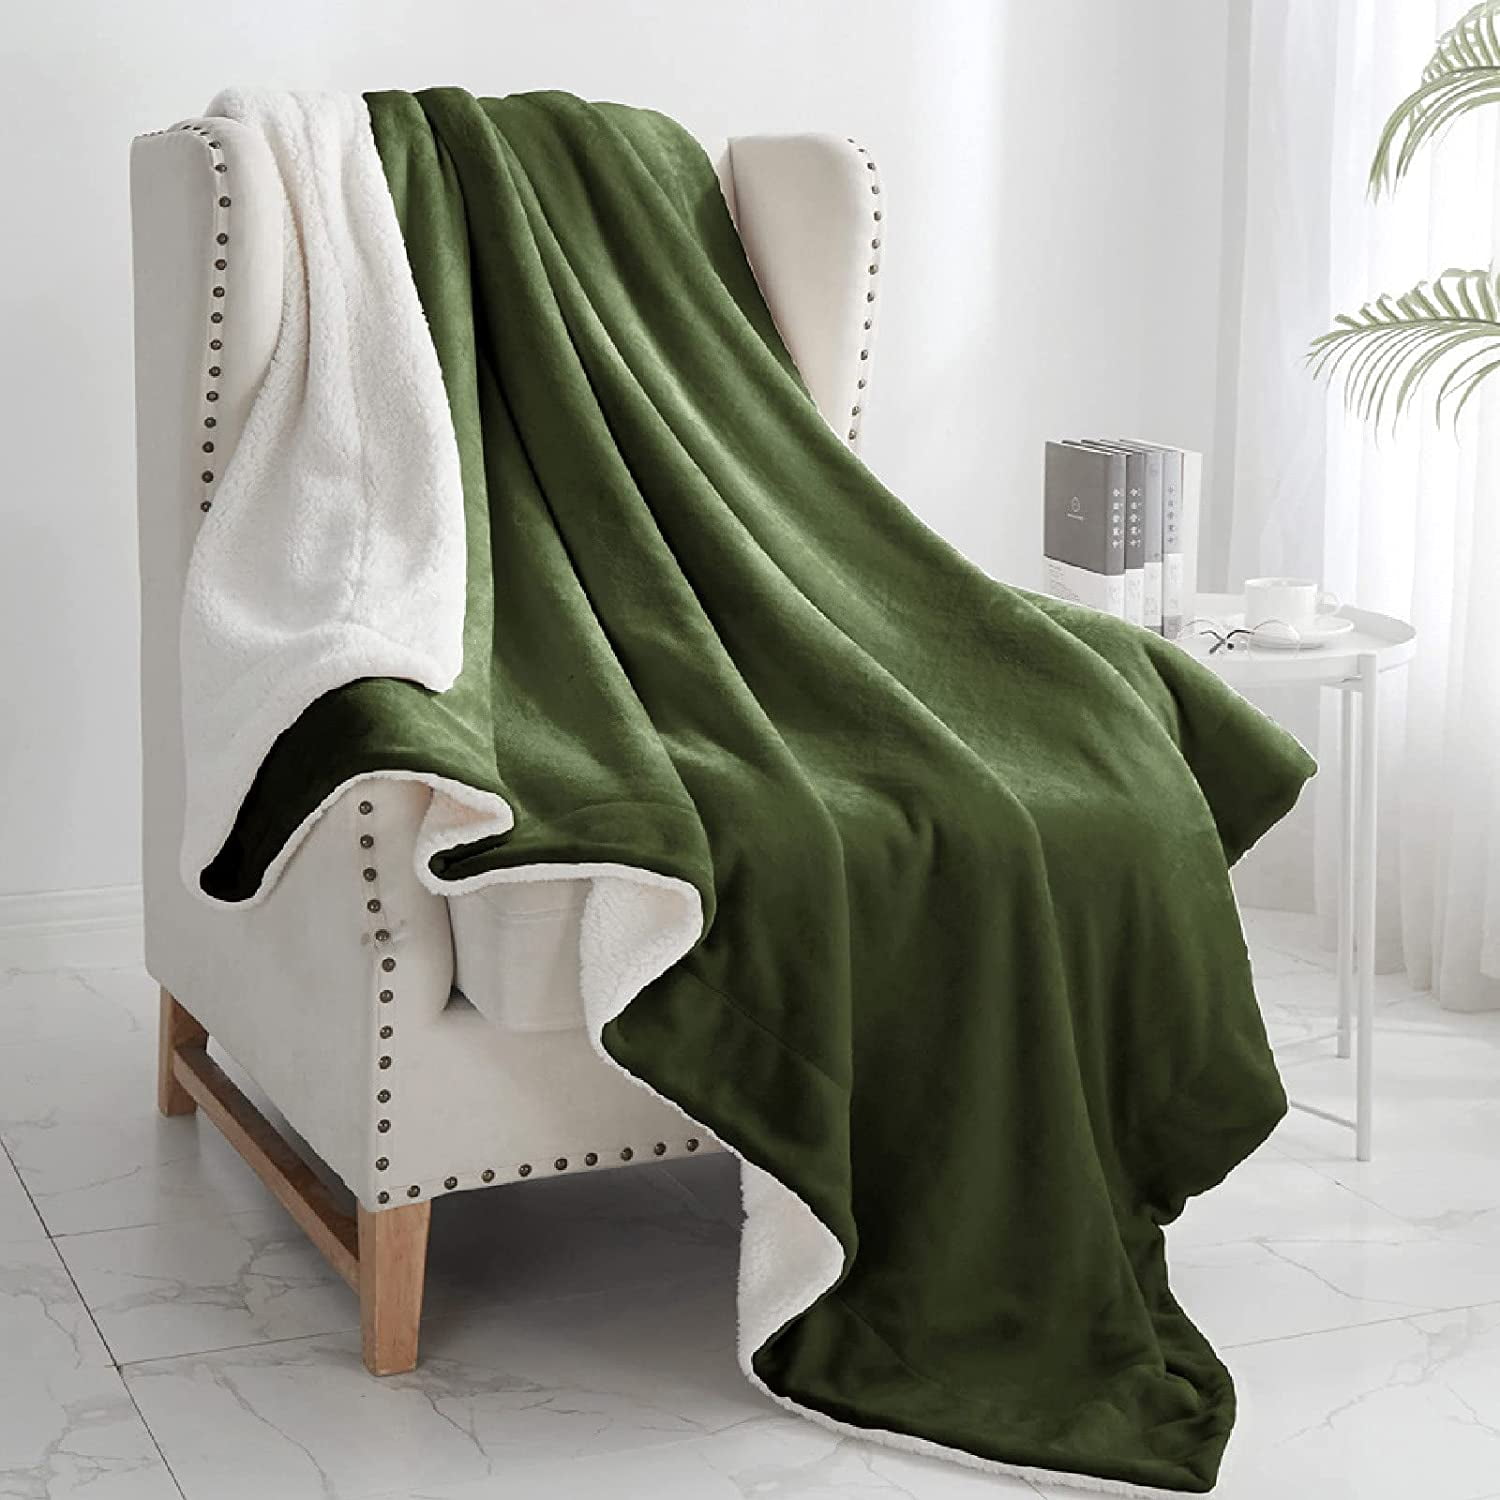 Green 50x60 Fleece Blankets Throw Size Green Throw Blankets for Couch Christmas Decorations Gifts for Women Cozy Bed Blankets Microfiber Dual Sided Fuzzy Throw Fit Sofa Thick Blanket Plush Warm